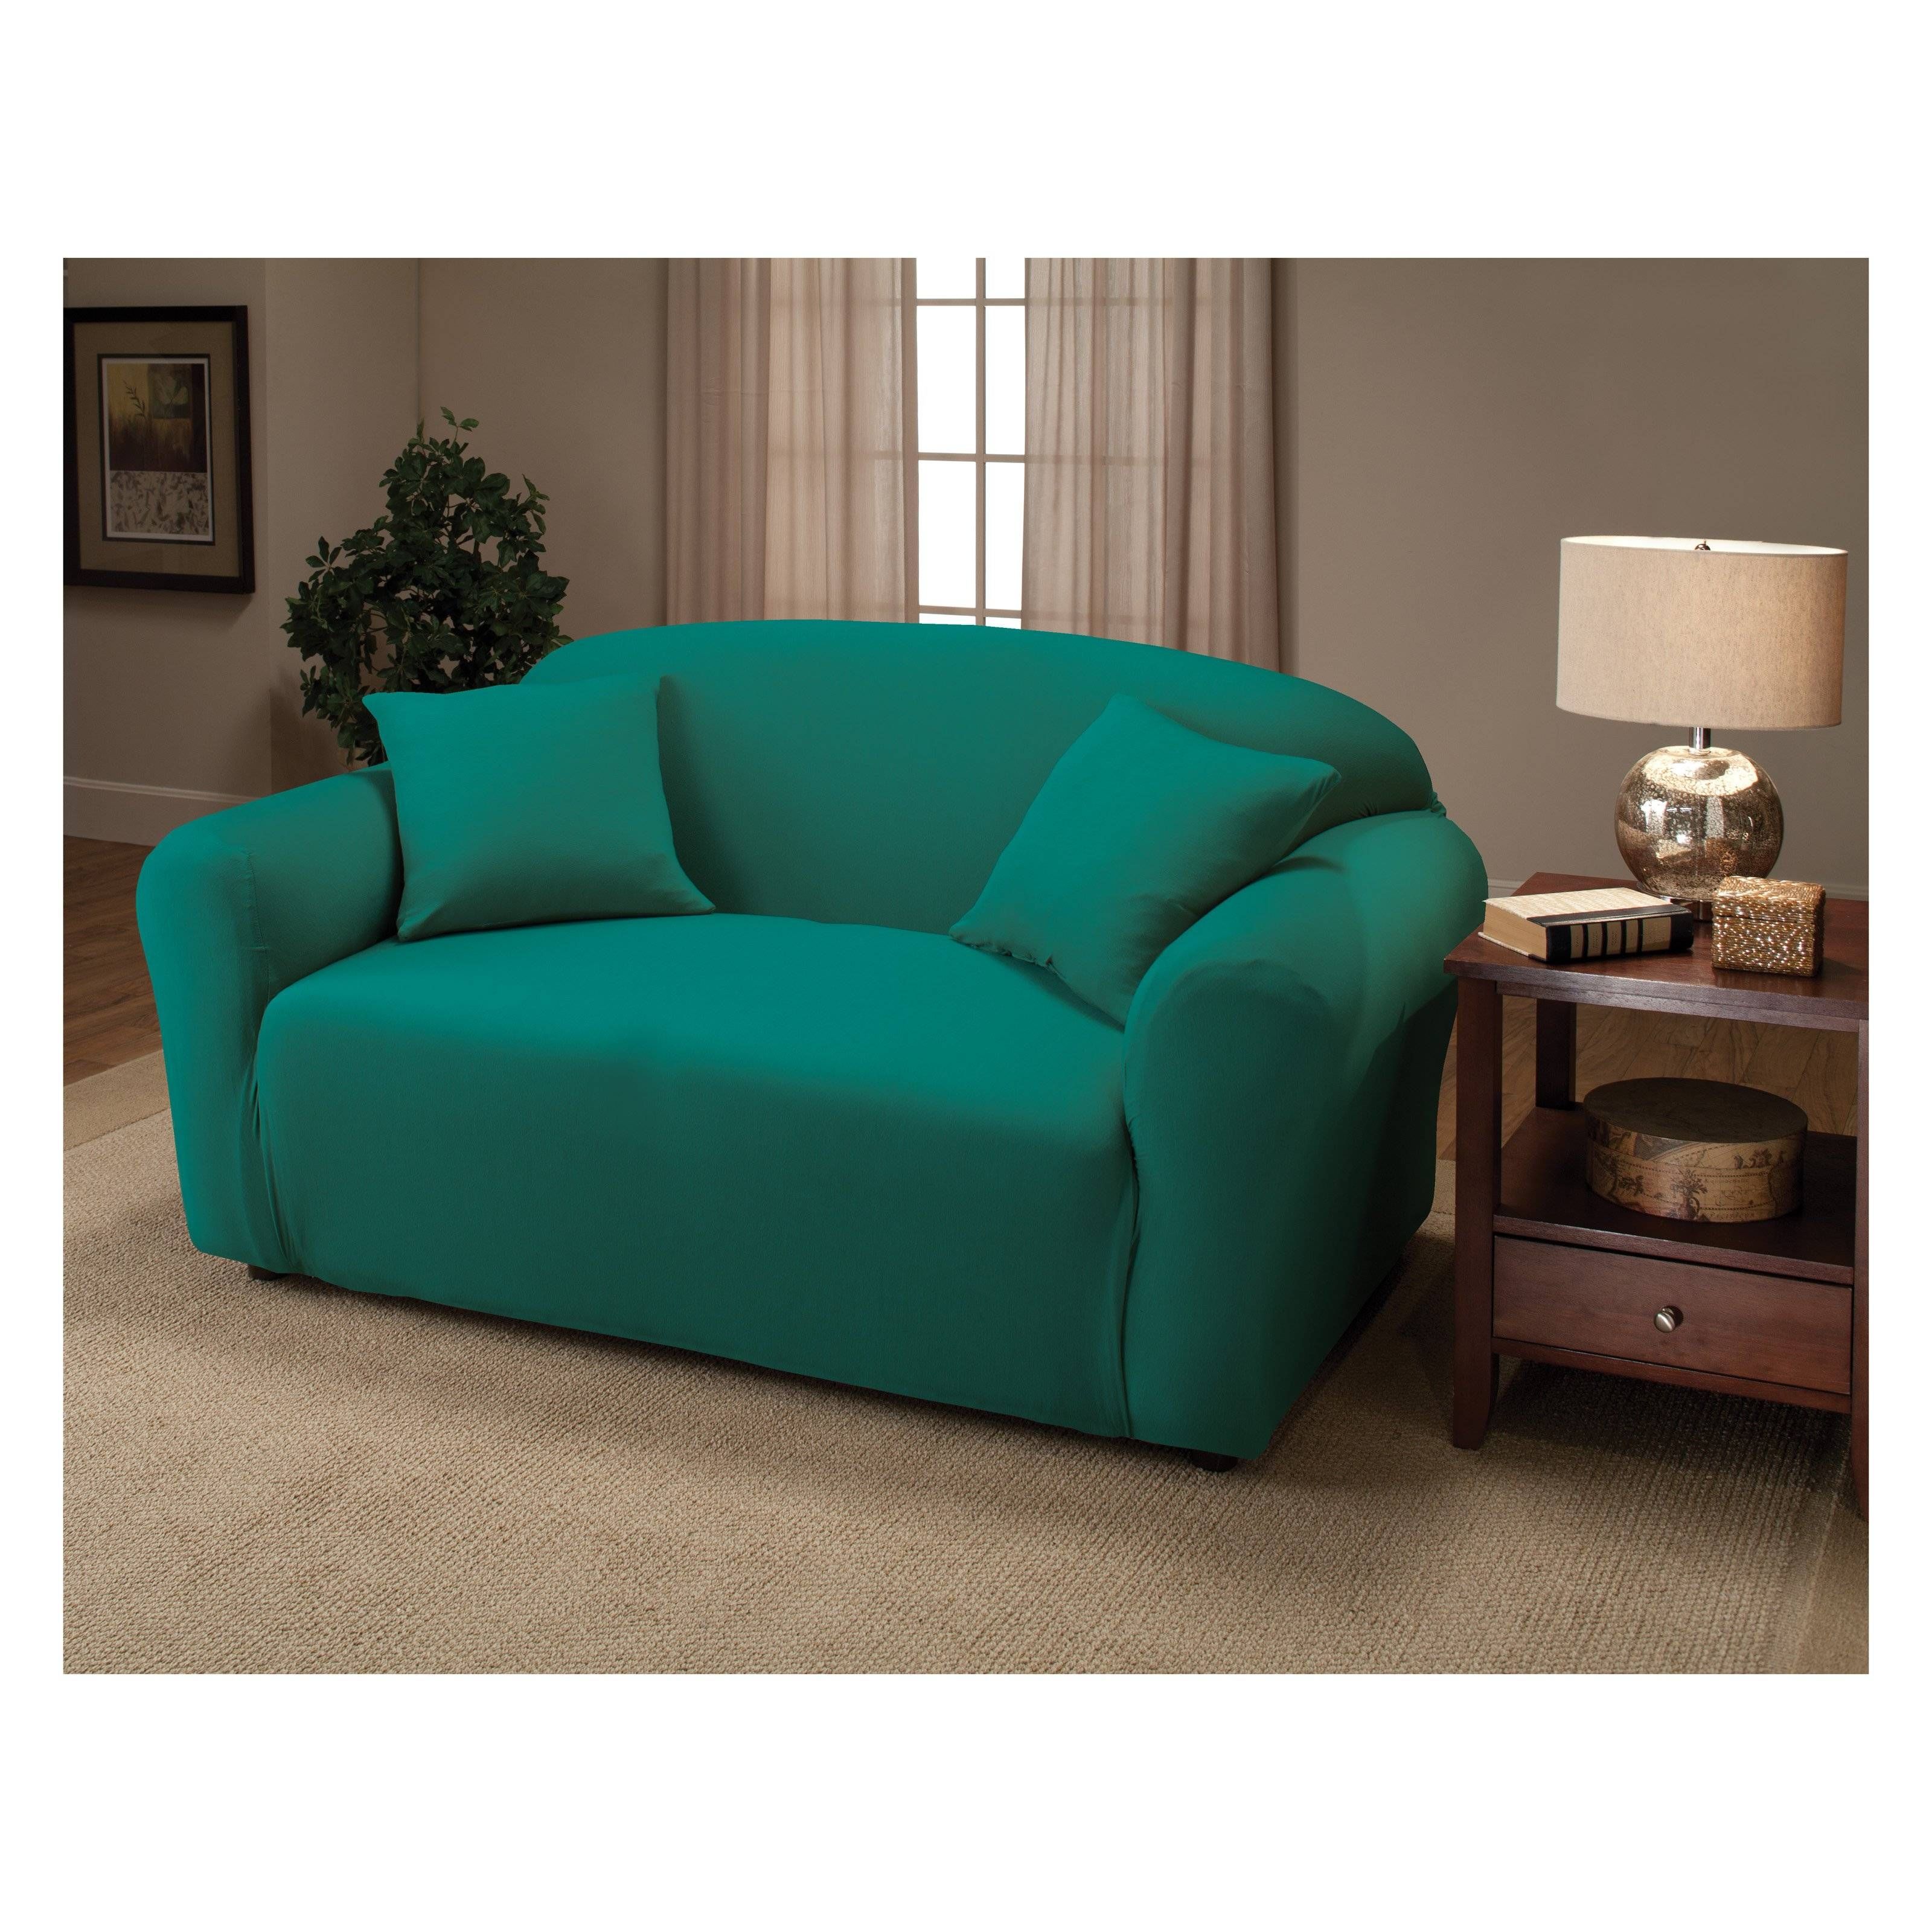 Sure Fit Stretch Pique Three Piece Loveseat Slipcover | Hayneedle Pertaining To Sofa Loveseat Slipcovers (Photo 9 of 30)